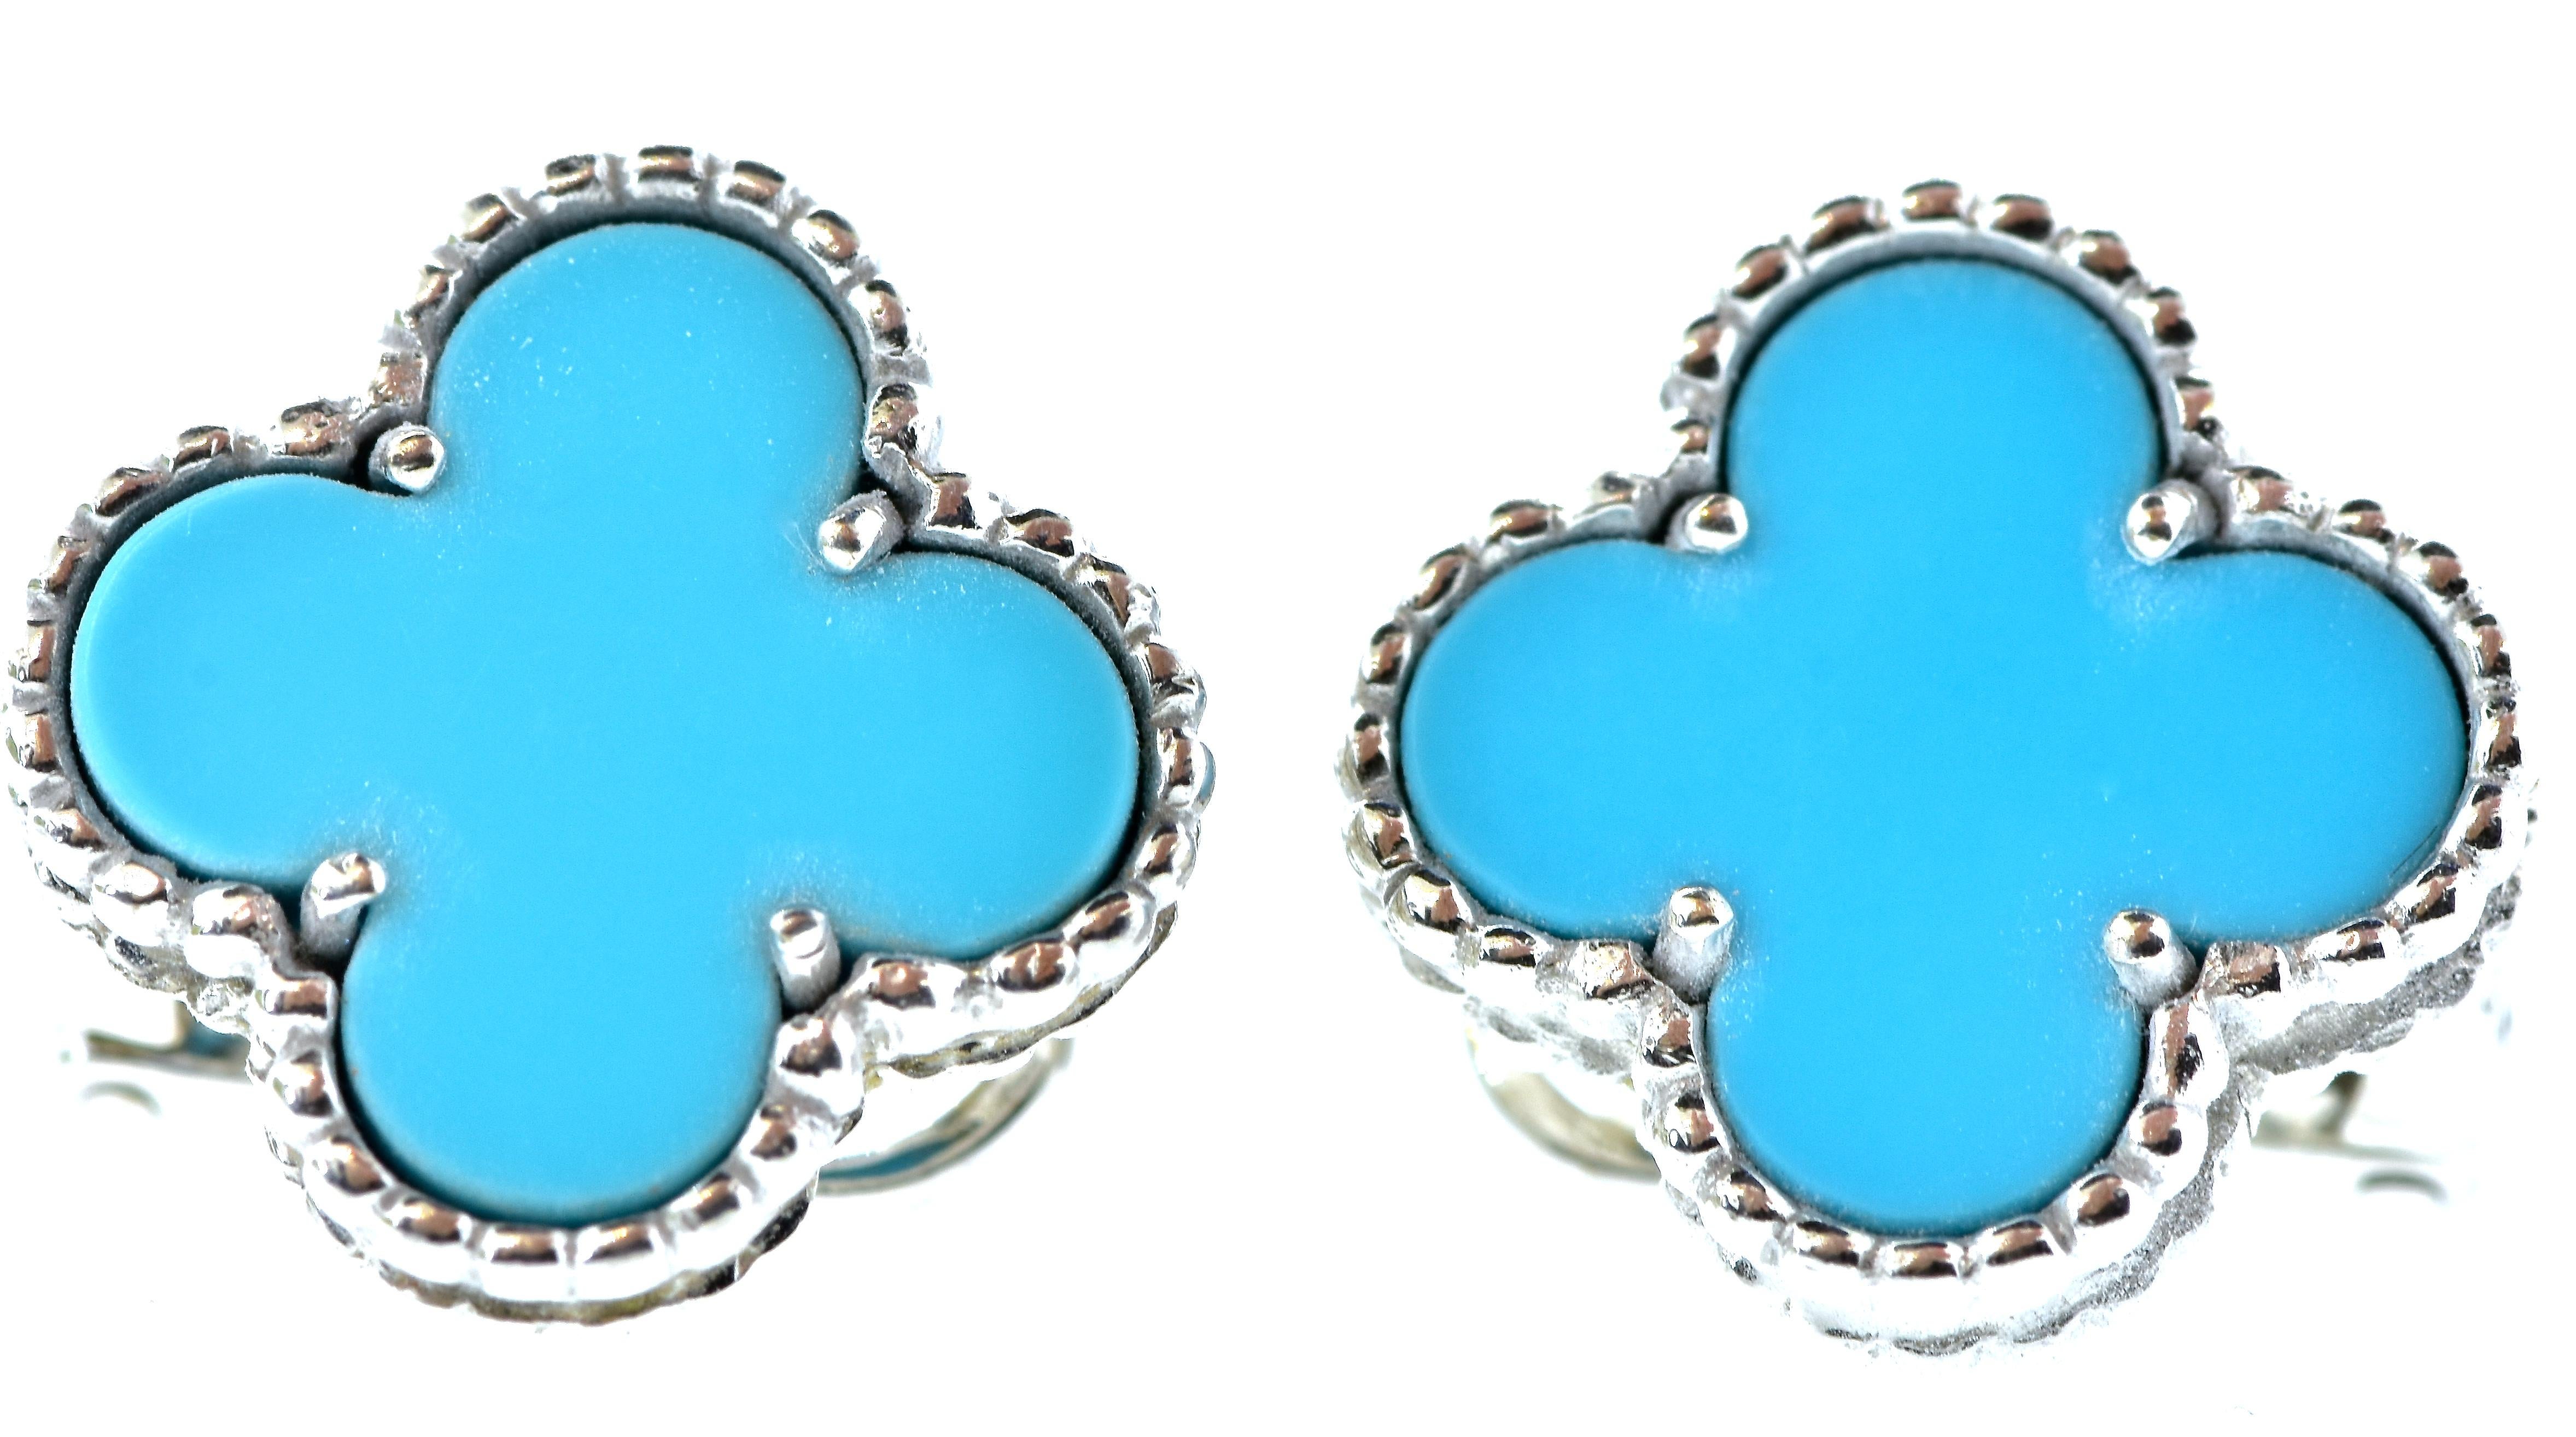 Van Cleef & Arpels vintage 15 mm. turquoise Alhambra earrings in like-new condition and accompanied with the original Van Cleef & Arpels pouch. 

These earrings, in this desirable size, with bright turquoise are rarest and certainly the most